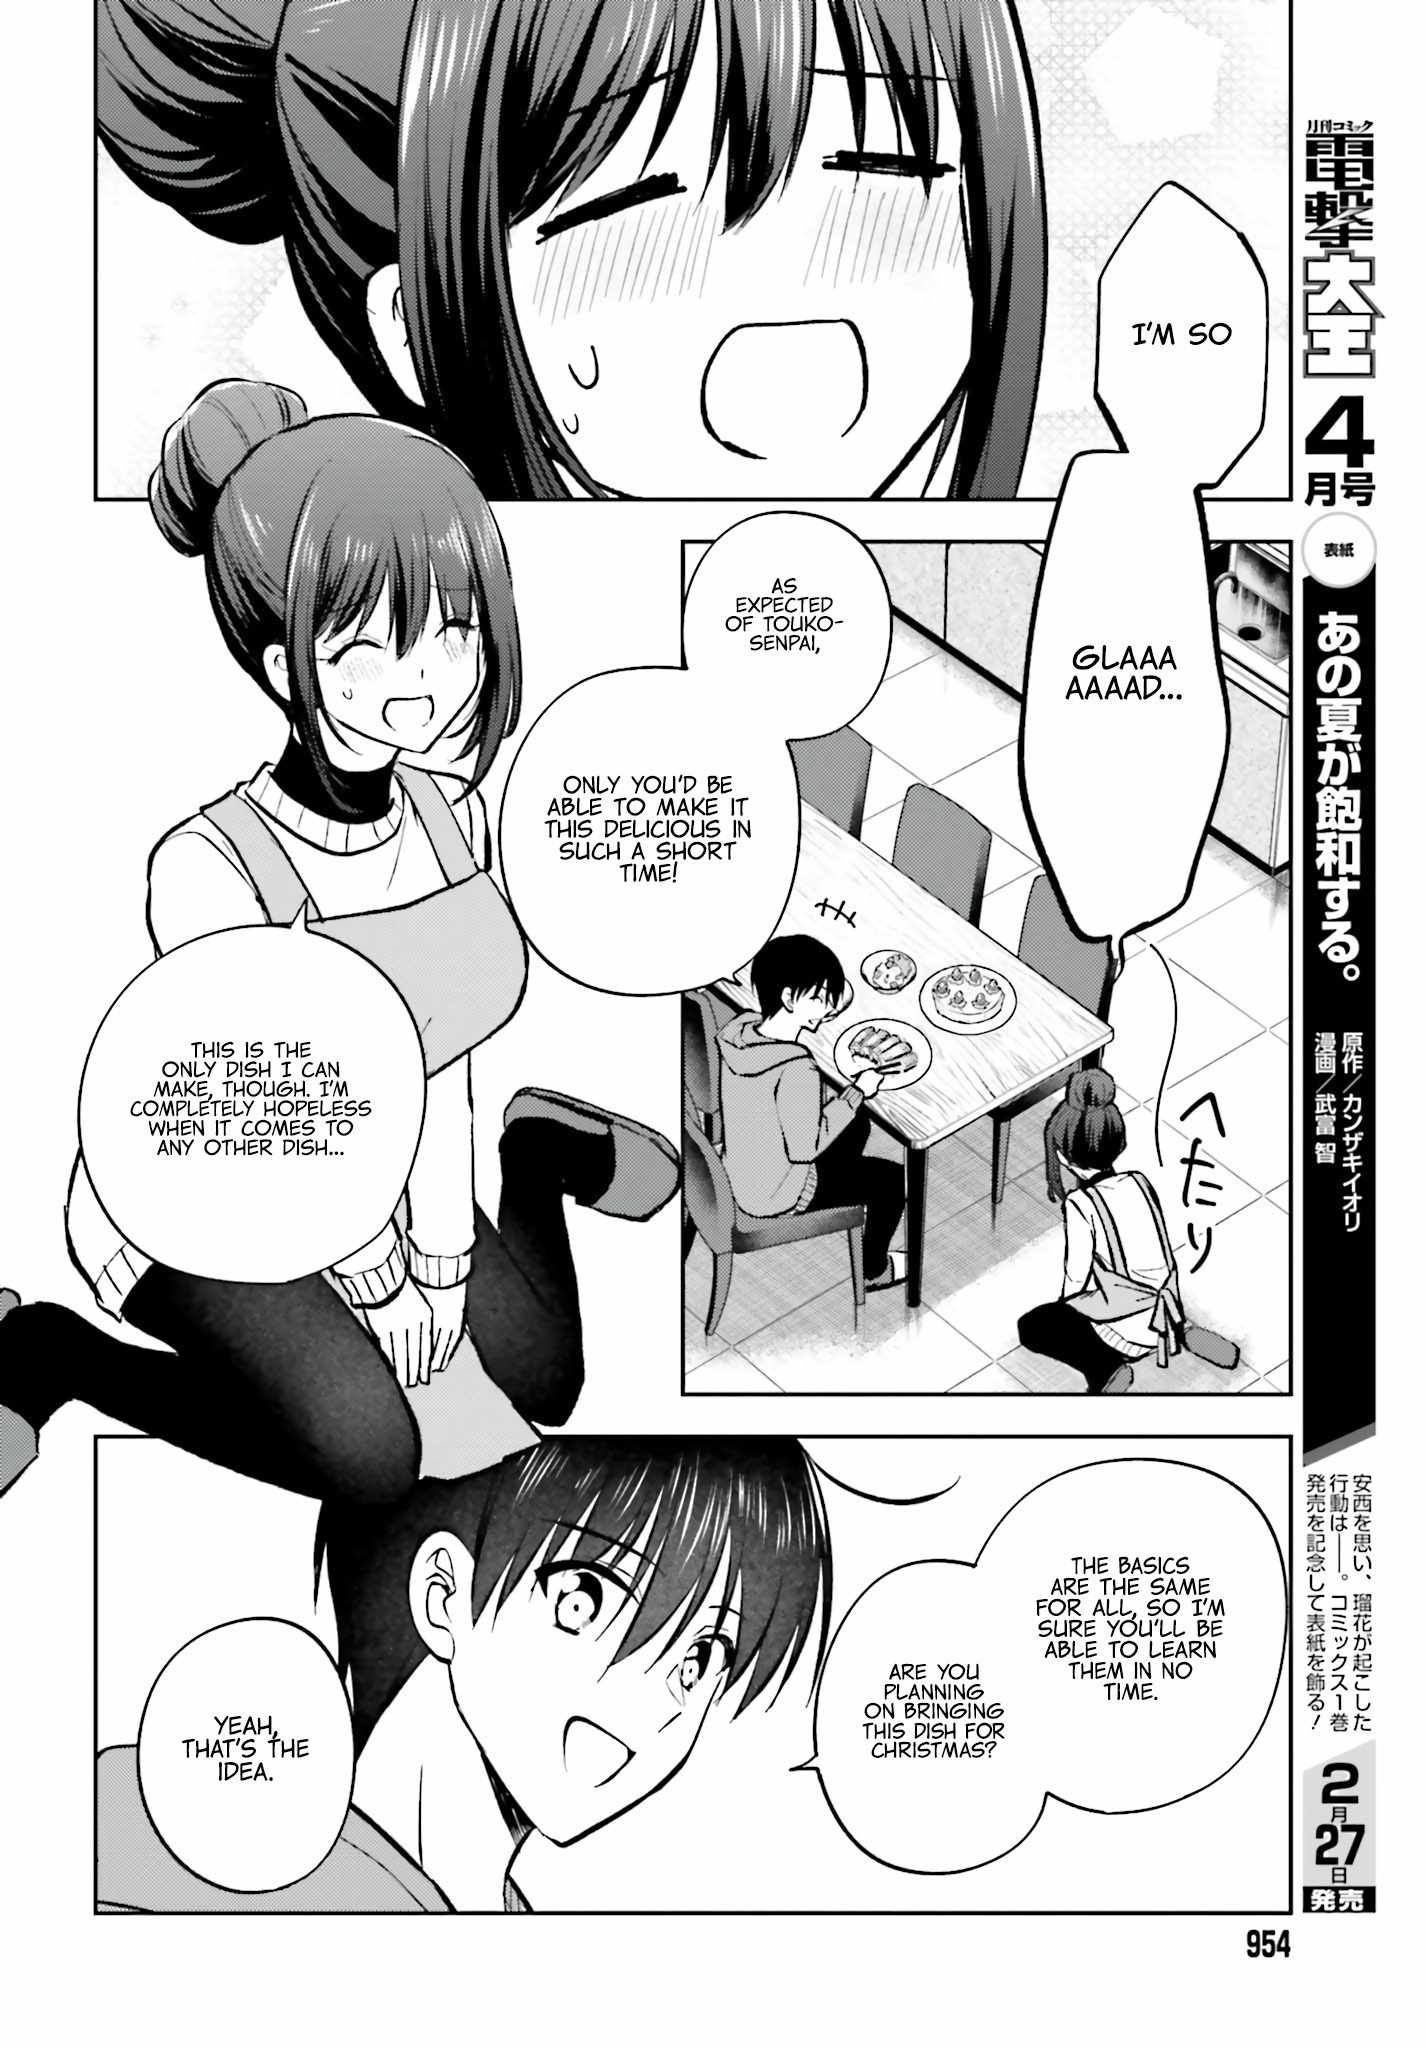 My Girlfriend Cheated on Me With a Senior, so I’m Cheating on Her With His Girlfriend Chapter 13-eng-li - Page 6